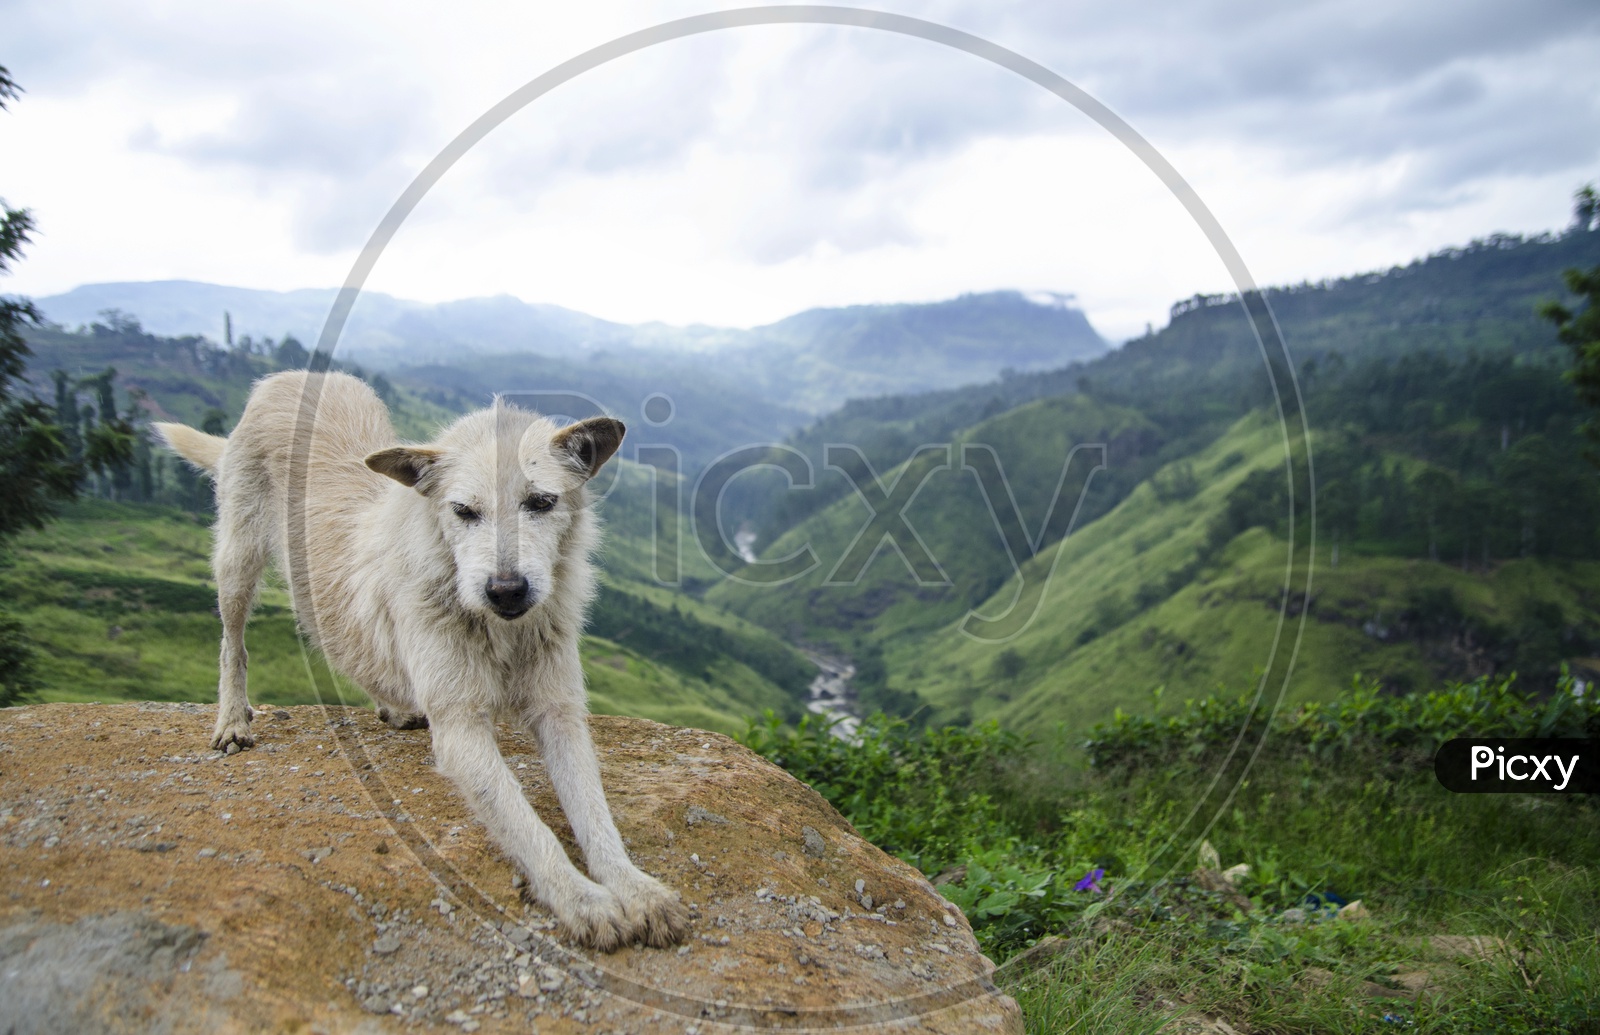 Landscape of beautiful Mountains of Sri Lanka with white dog in the foreground